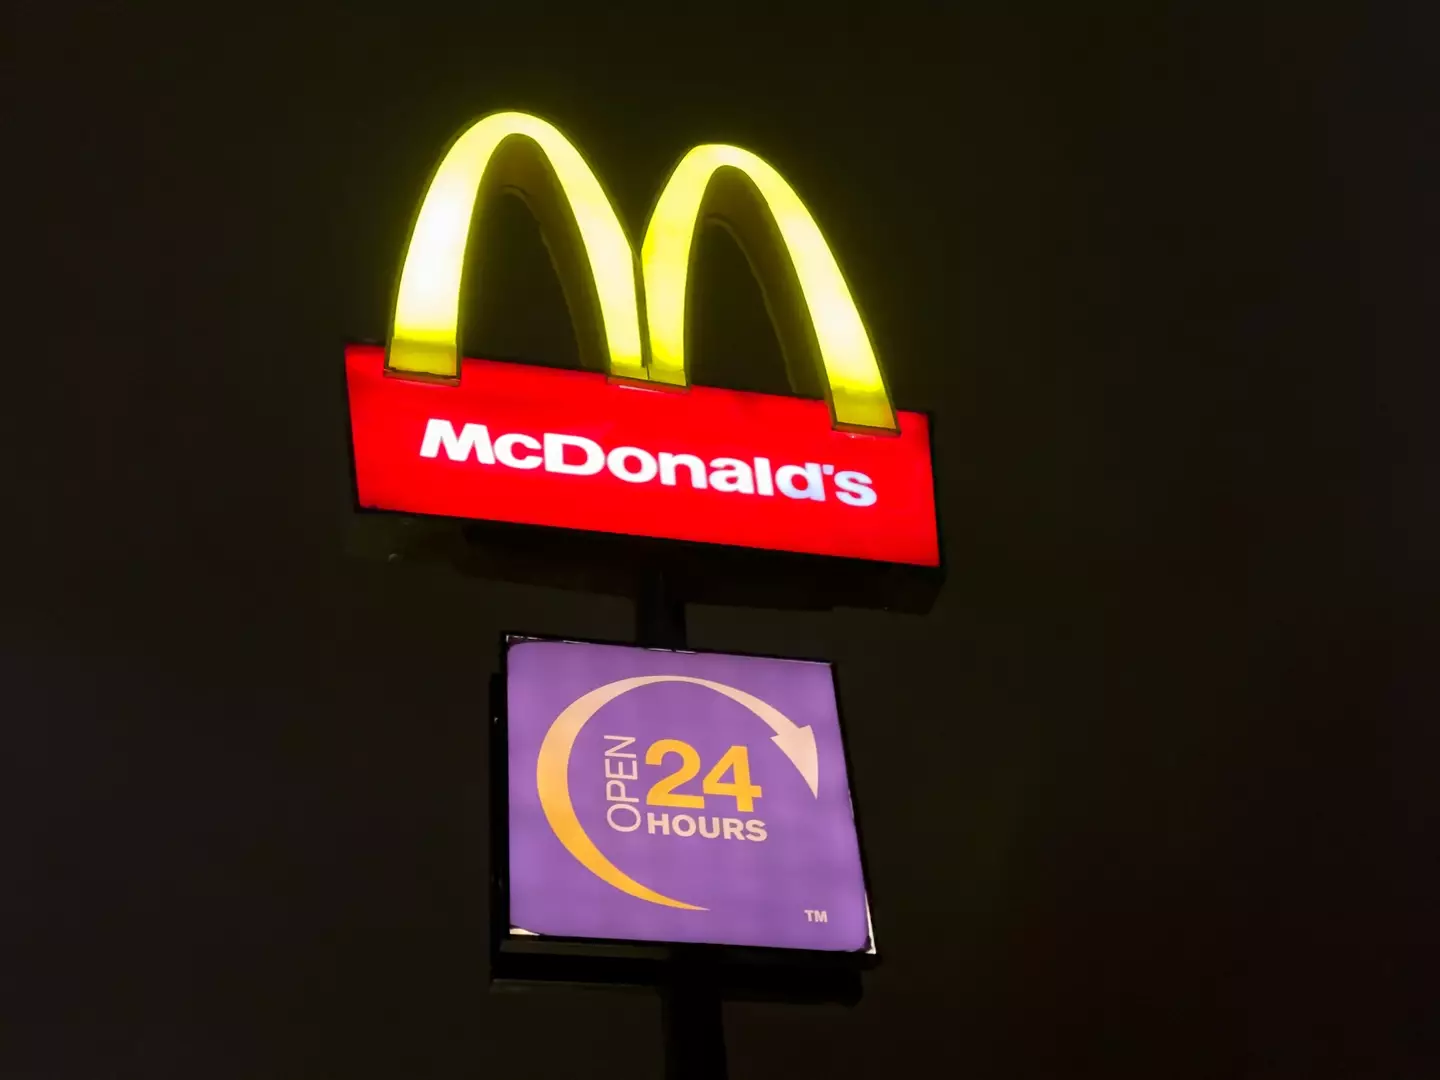 McDonald’s have announced that customers will have the opportunity to trade in their stickers